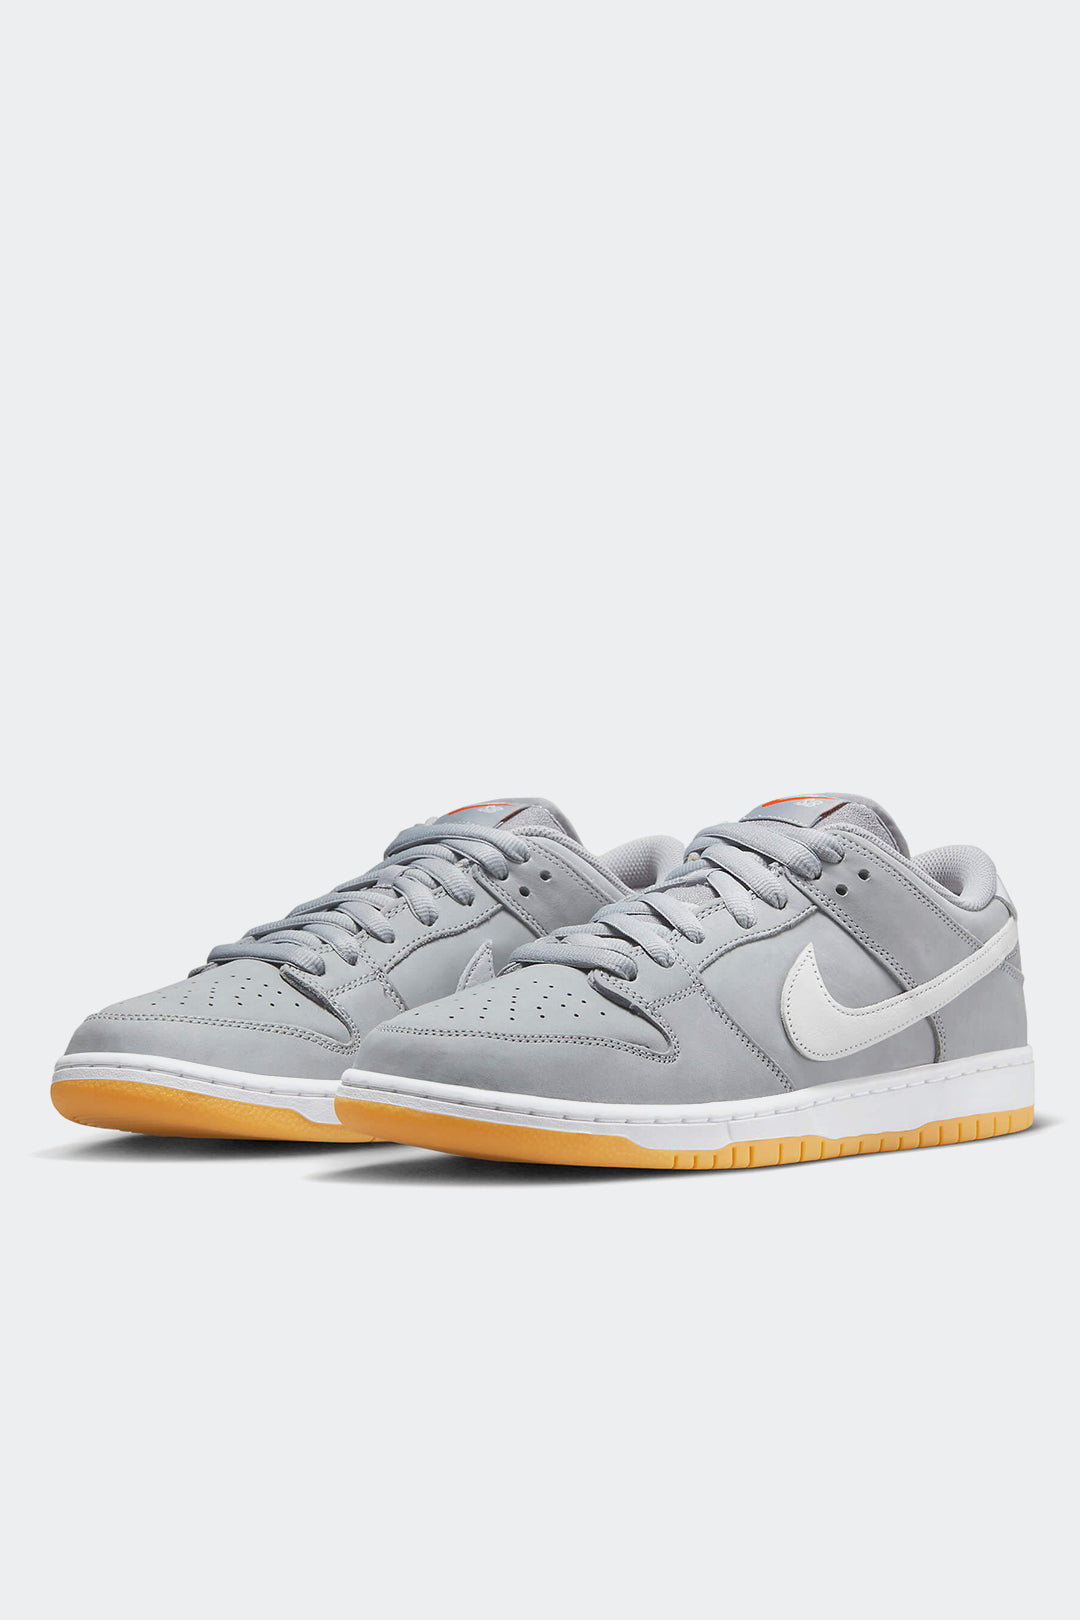 Nike Sb Dunk Low Pro Iso Sp23 HYPE